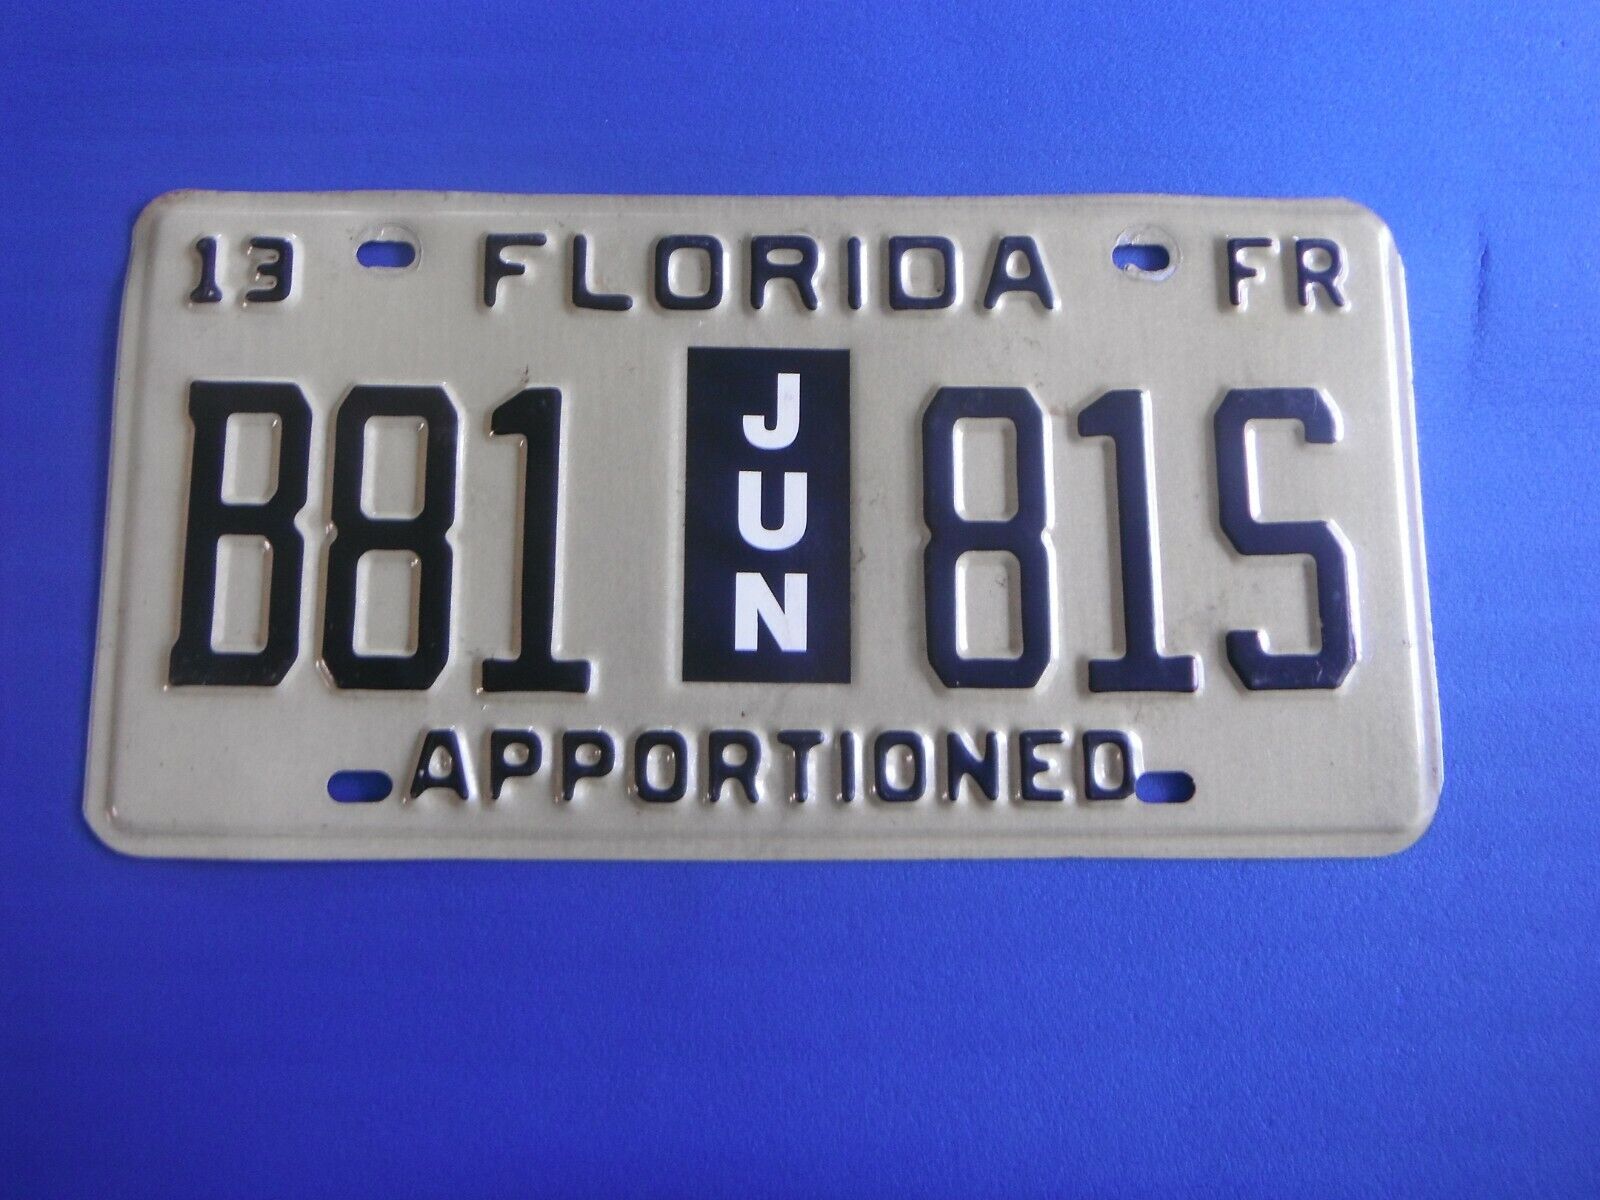 2013 Florida Apportioned License Plate Tag